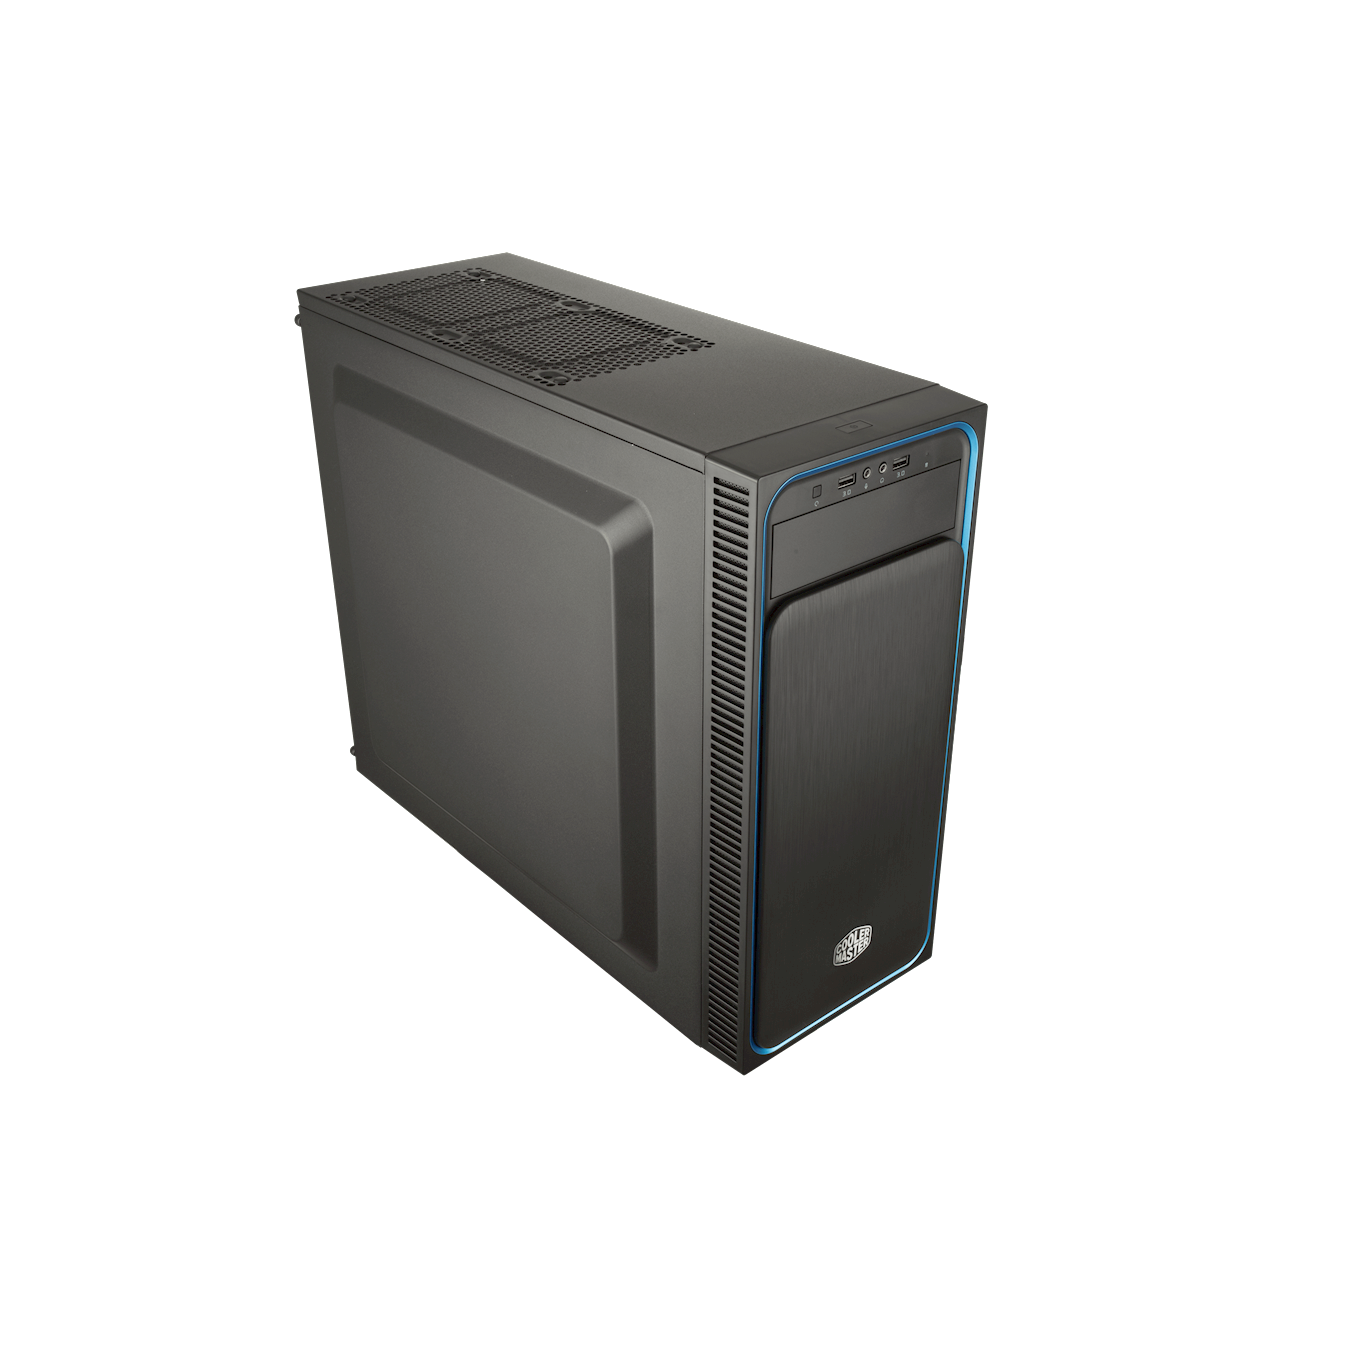 MasterBox E500L Mid Tower Case - Keep a clean design and hide your I/O ports behind this smooth front slide panel.